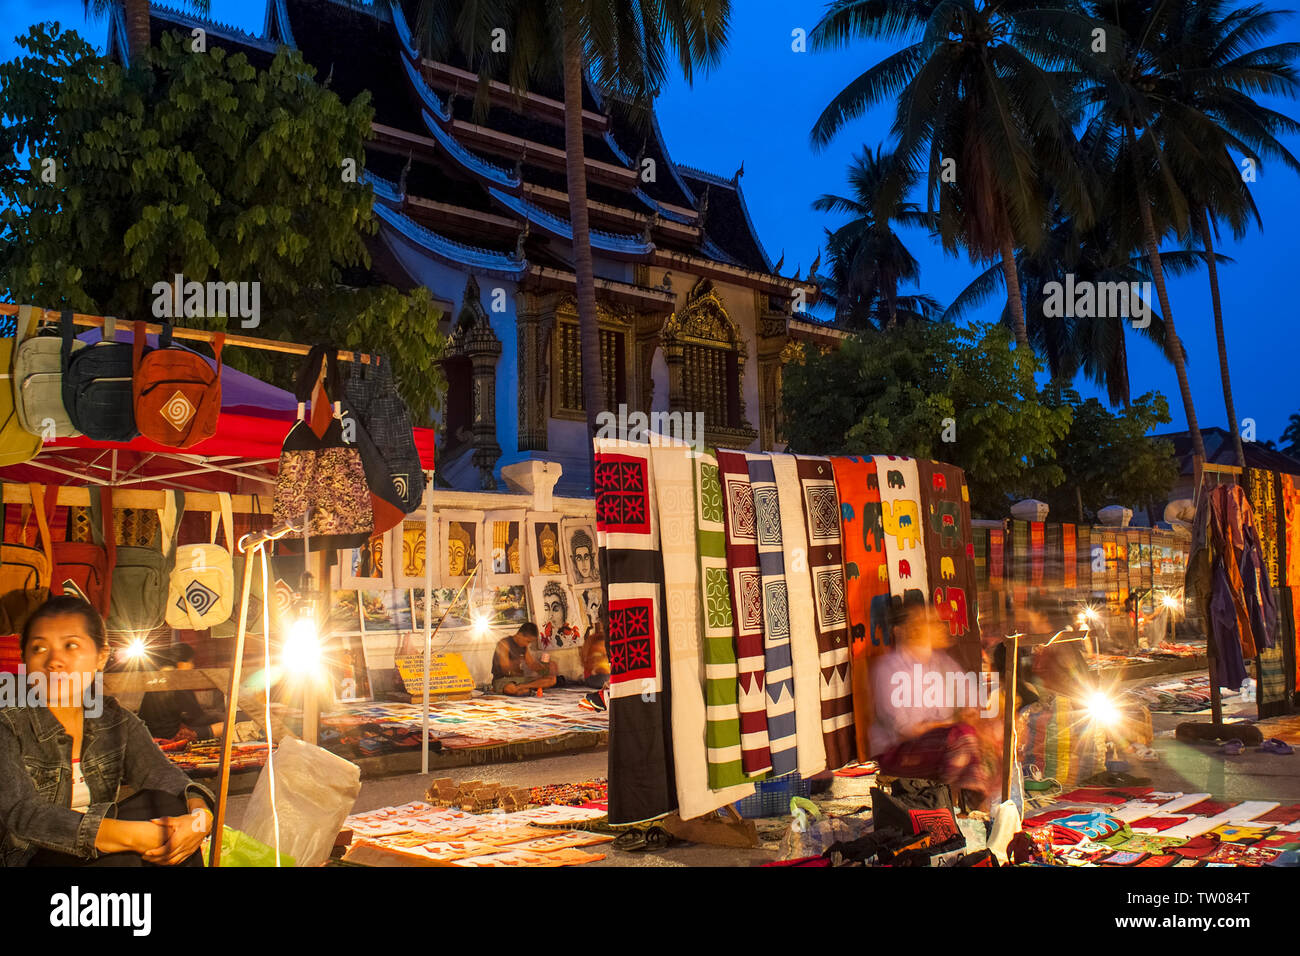 The Hmong Night Market with Haw Pha Bang temple in the background. Stock Photo